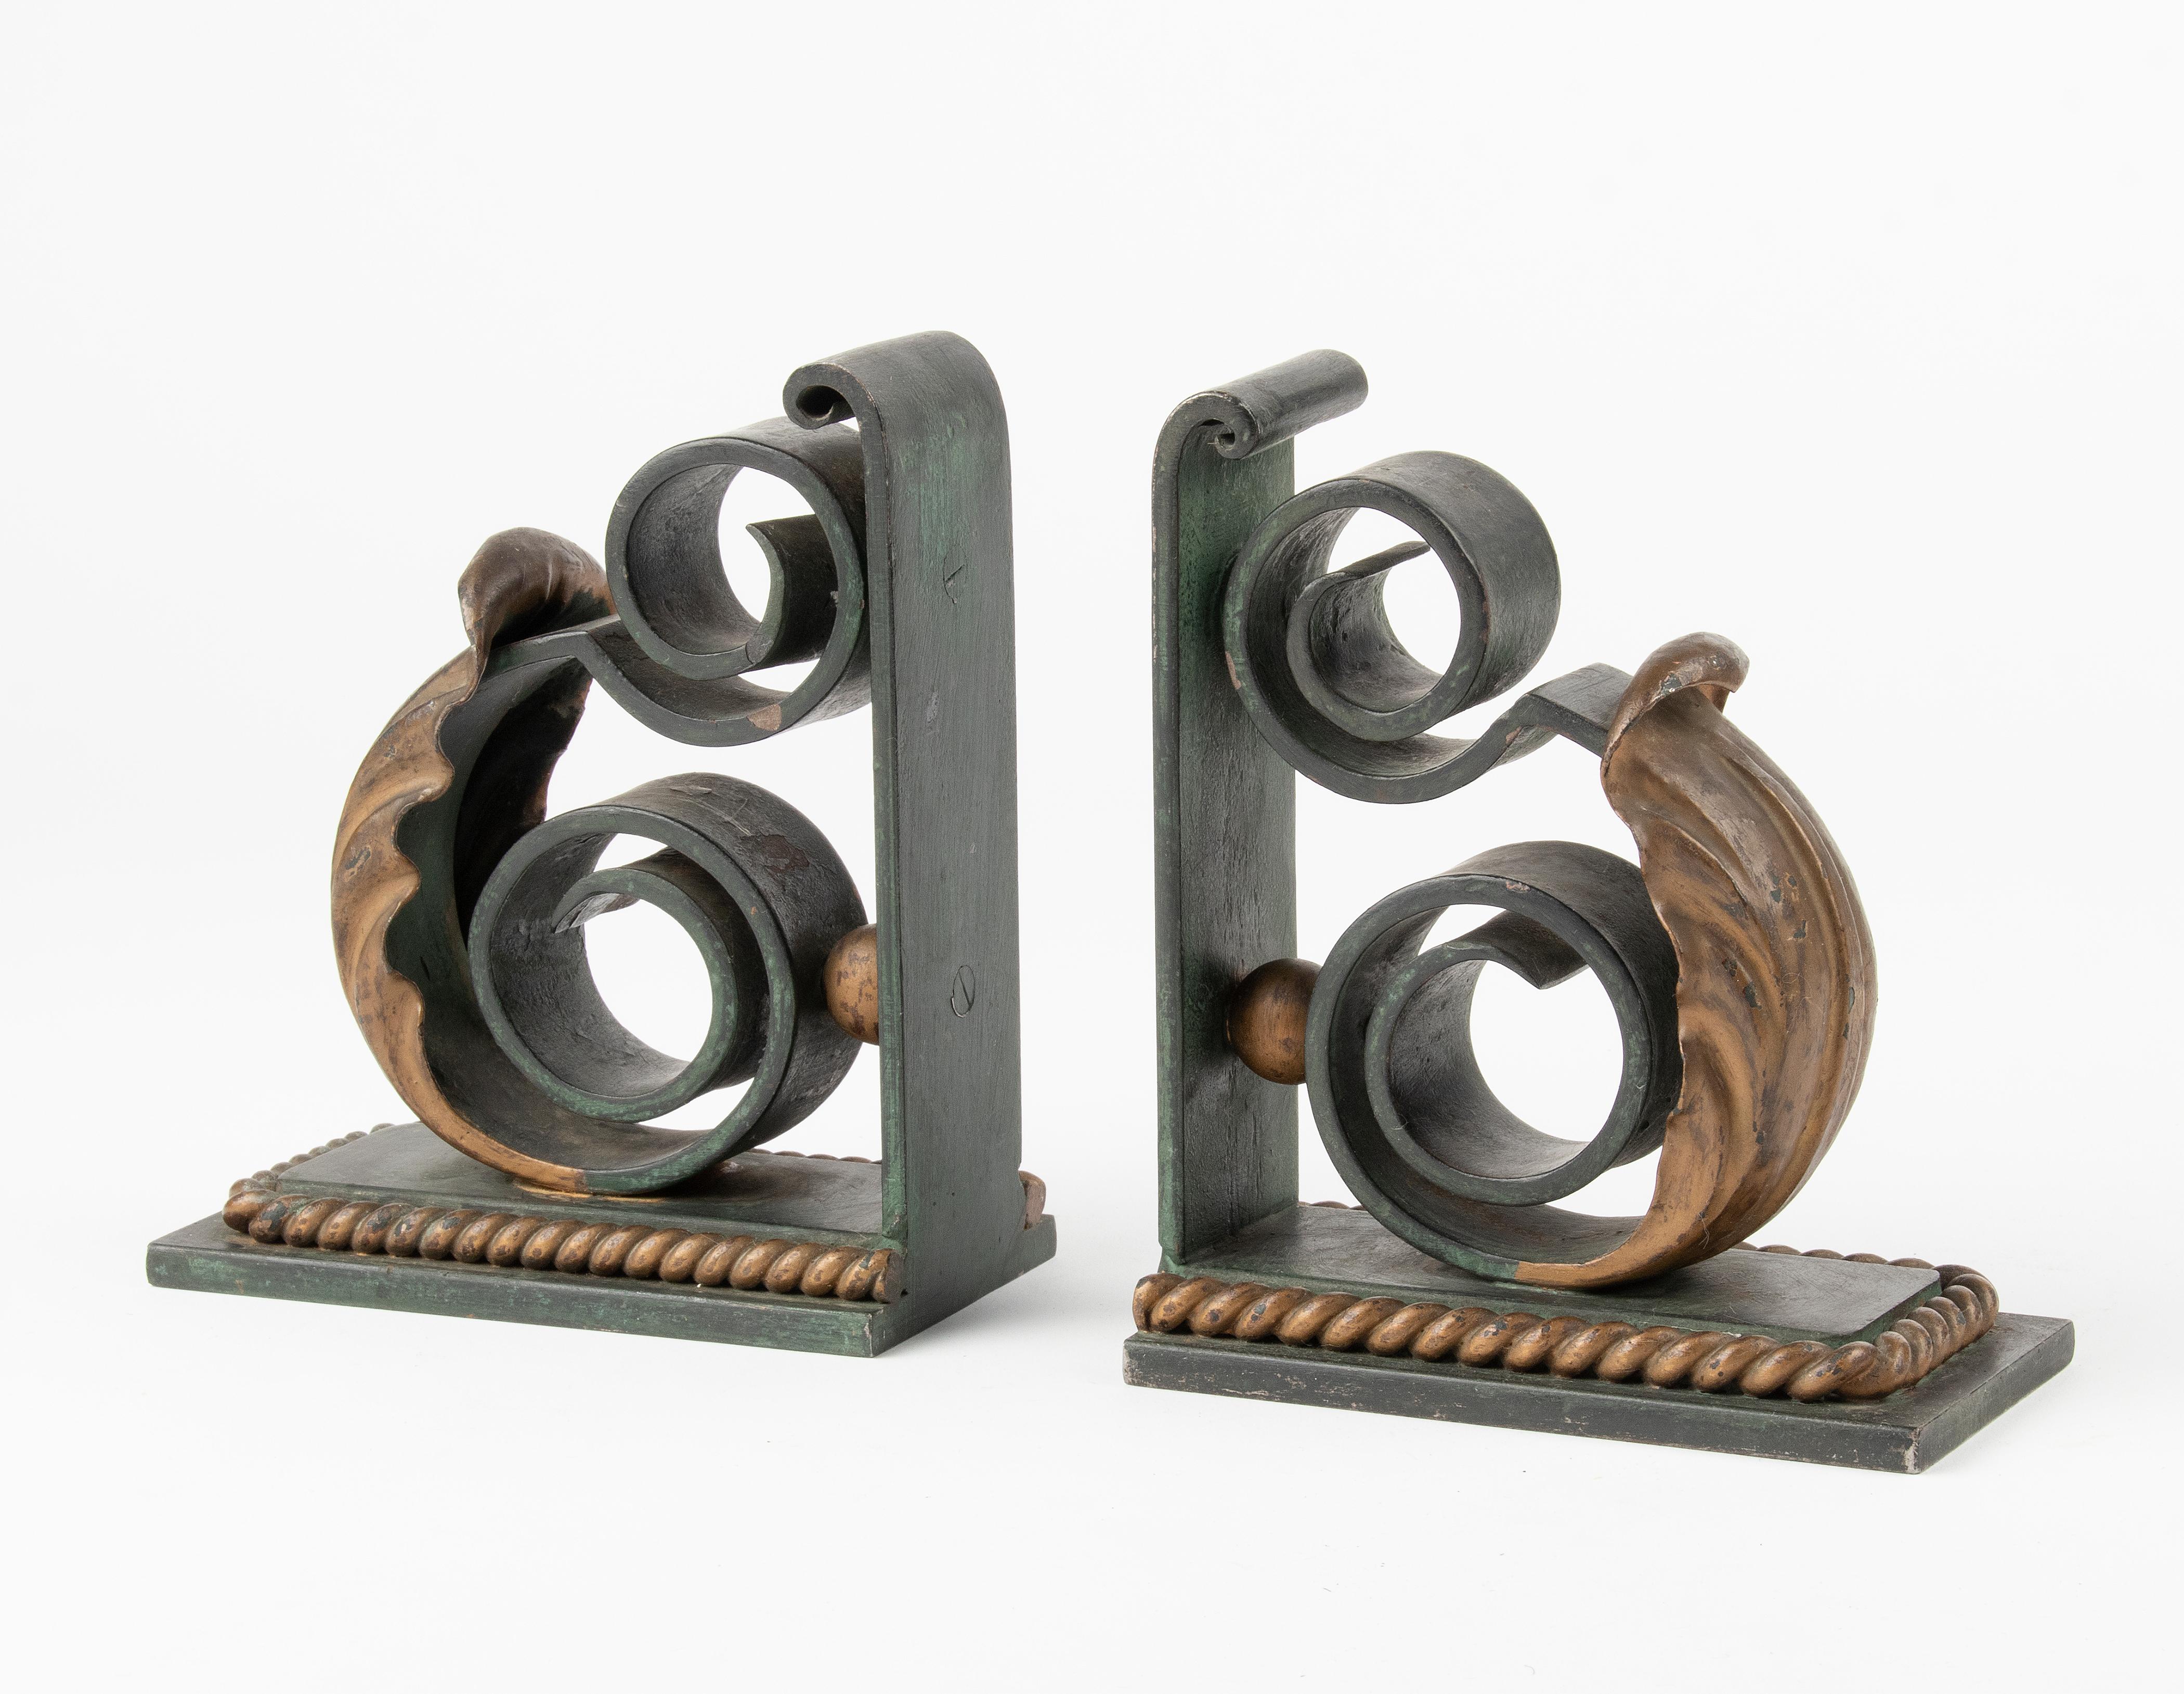 A pair of heavy duty forged iron book-ends. Nicely patinated in green and bronze-like colors. 
The pair is in good condition. Heavy and sturdy. 

